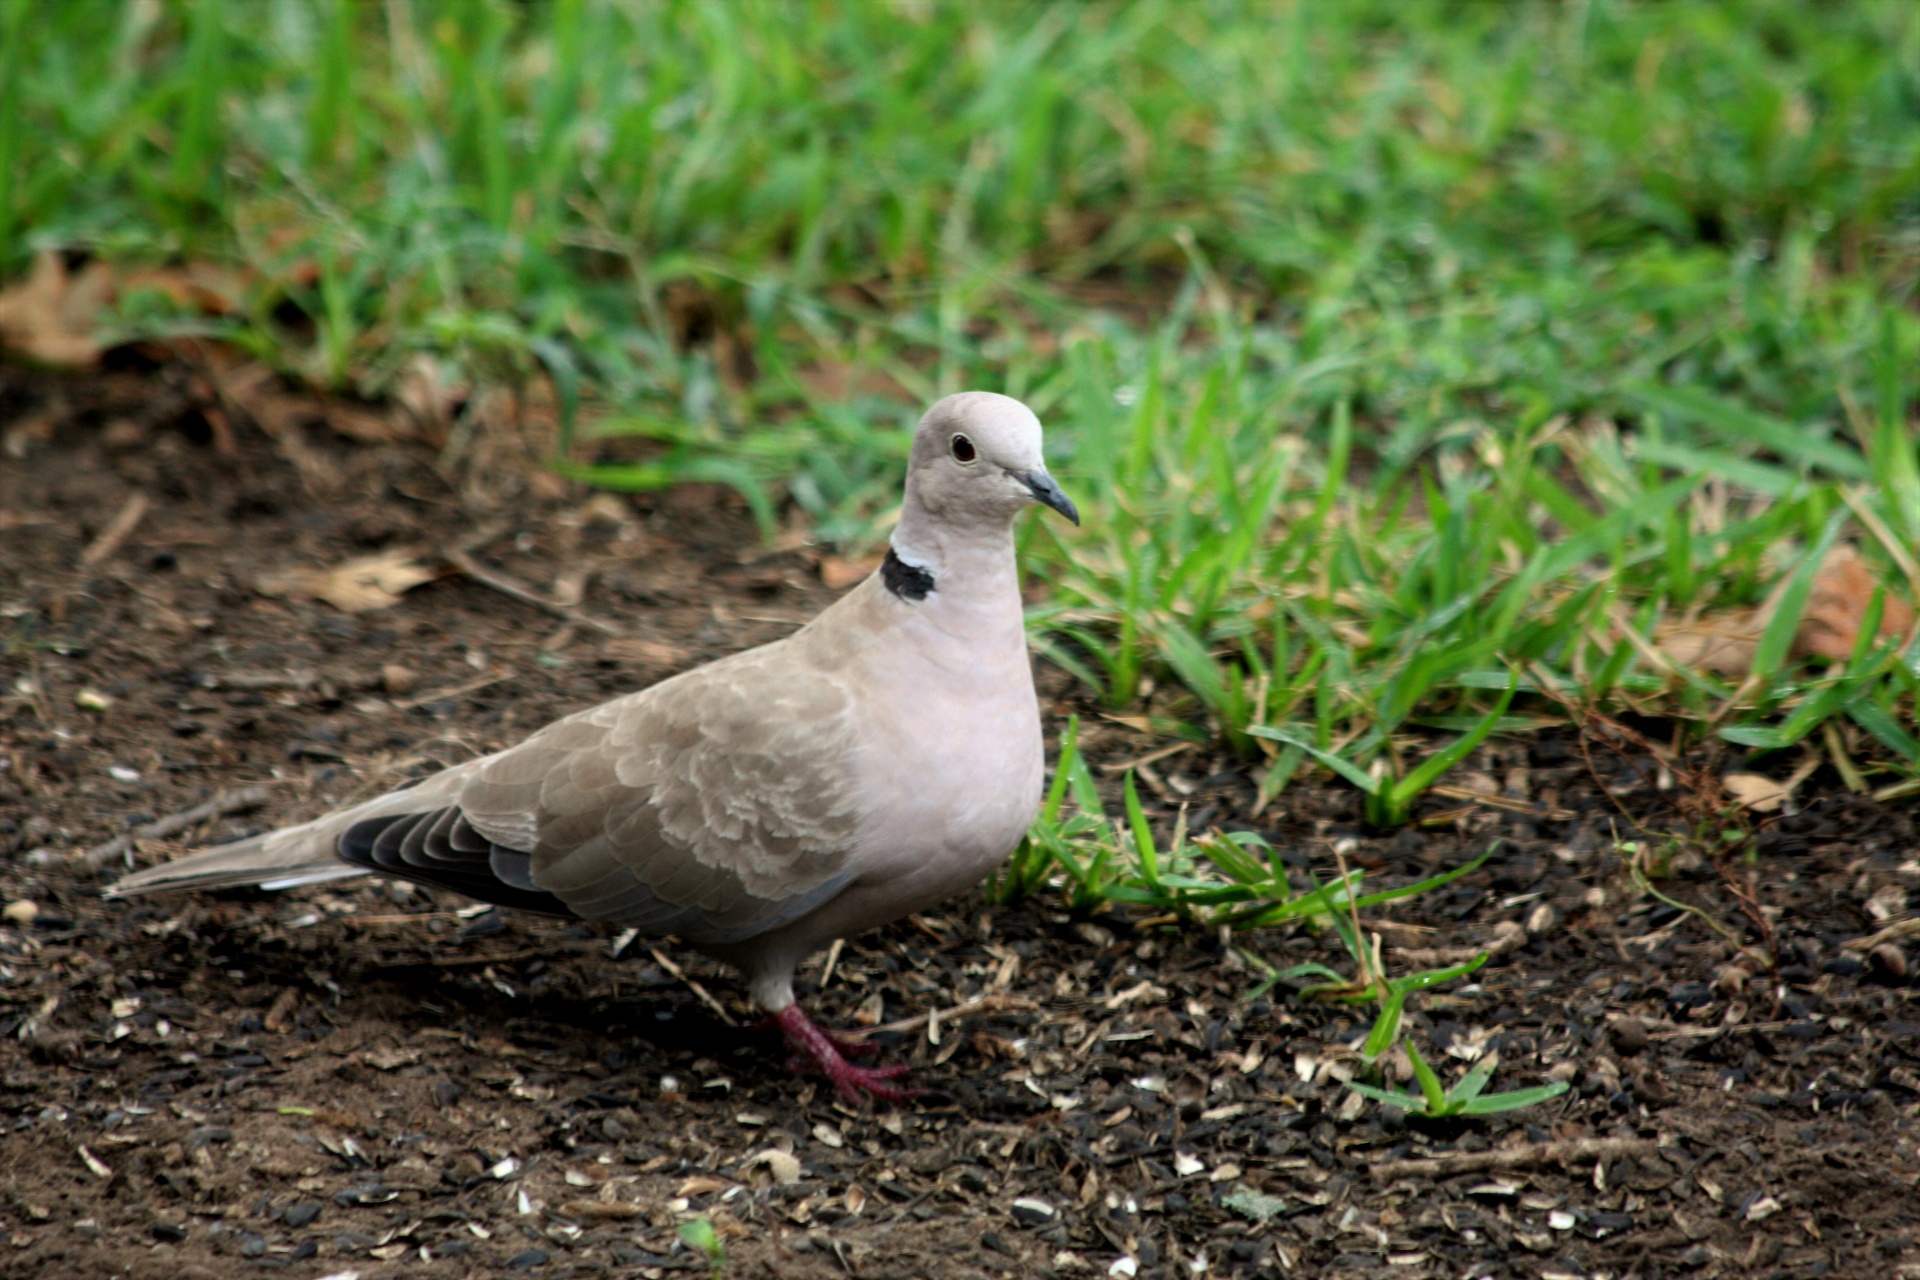 Close-up of a beautiful Eurasian collared dove as it walks through green grass and sunflower seeds on the ground.